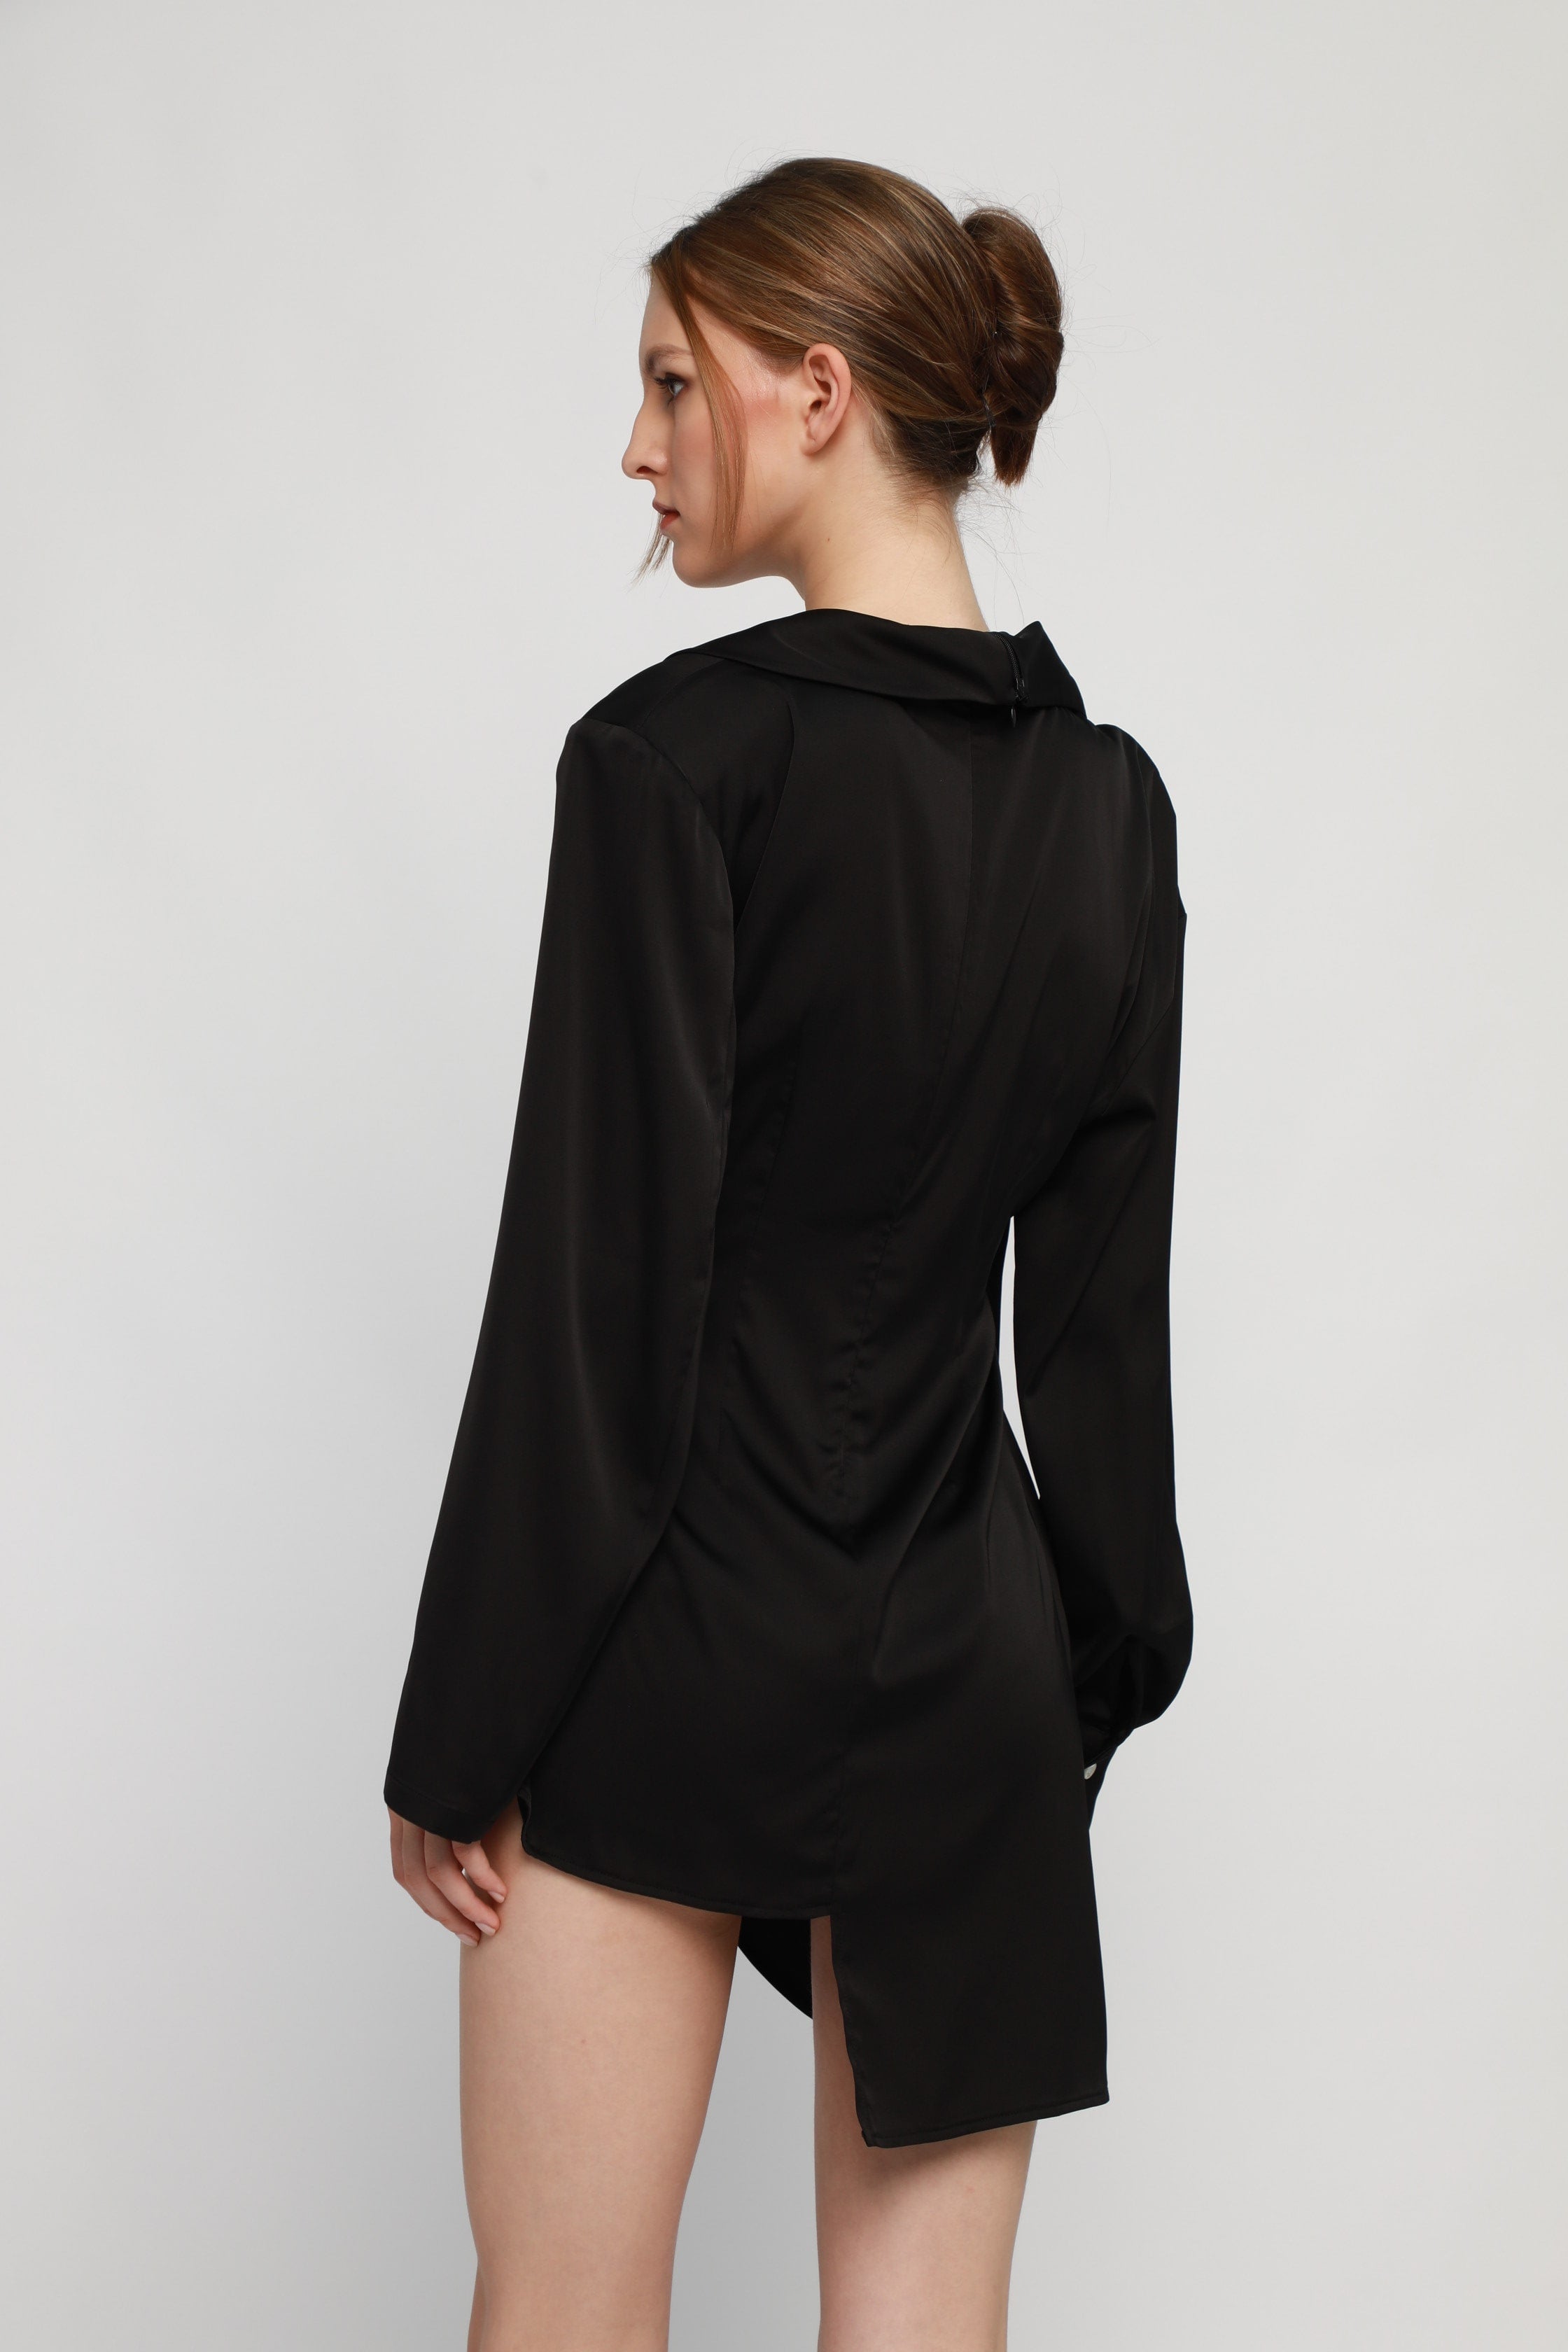 Black Satin Asymmetrical Shirt with Contrast Panel Detail and Suit Skirt - ByQuaint